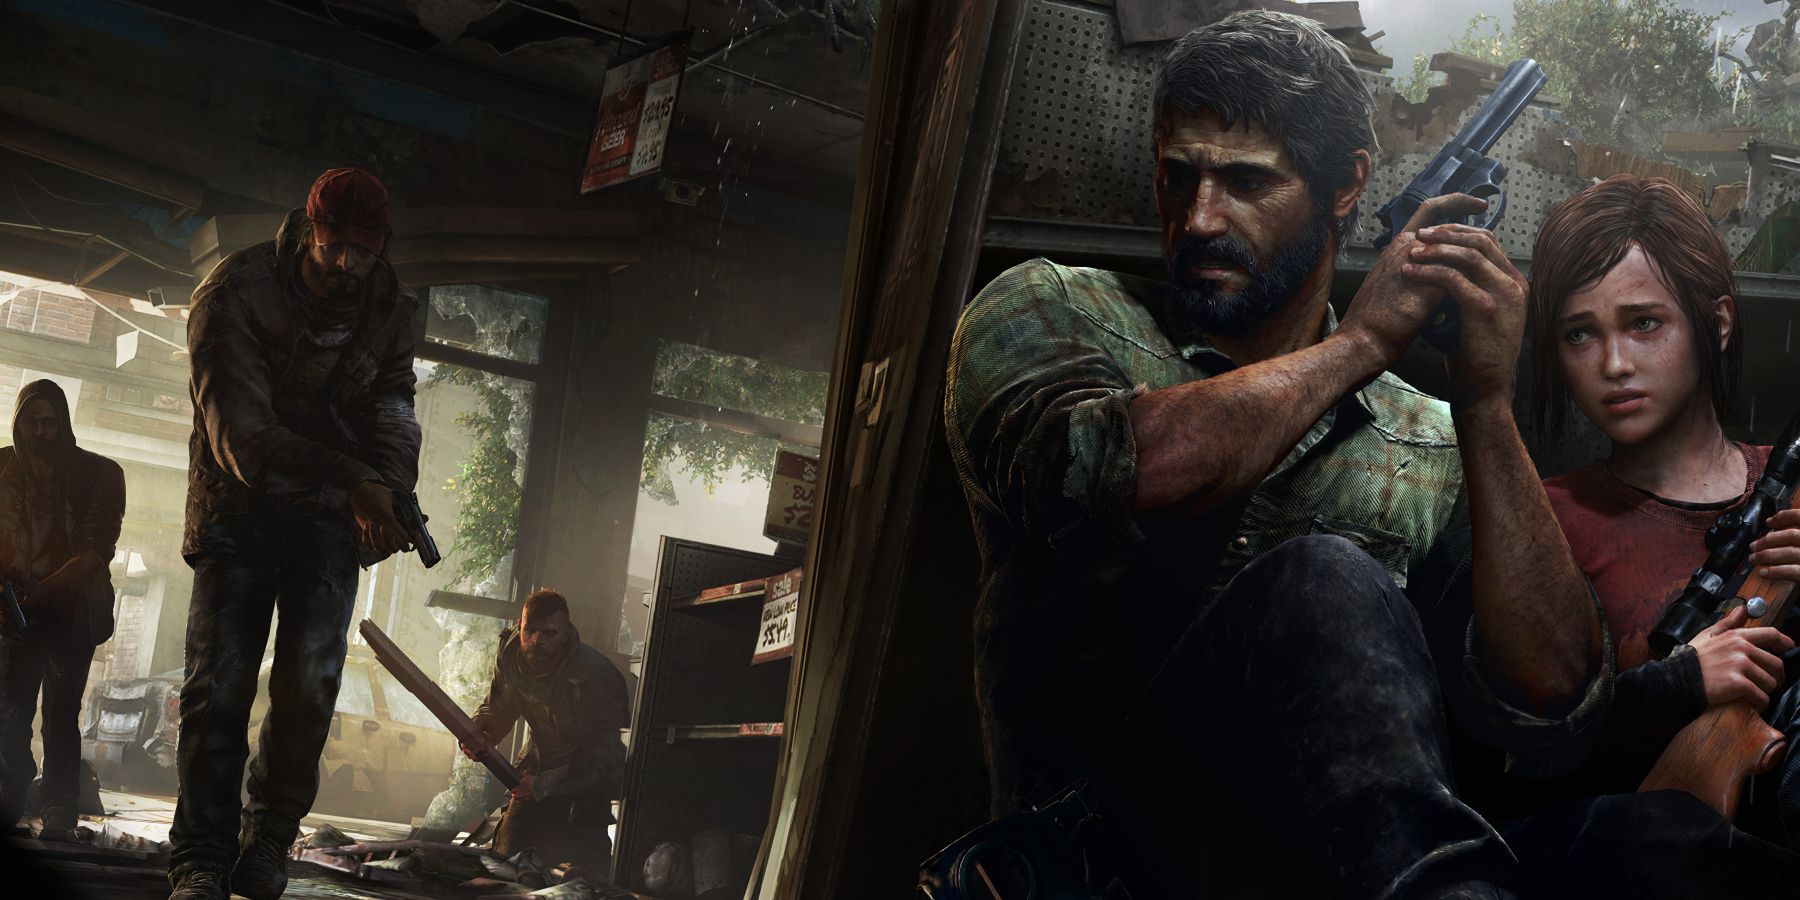 The Last of Us: Survival Edition, Post-Pandemic Edition Revealed